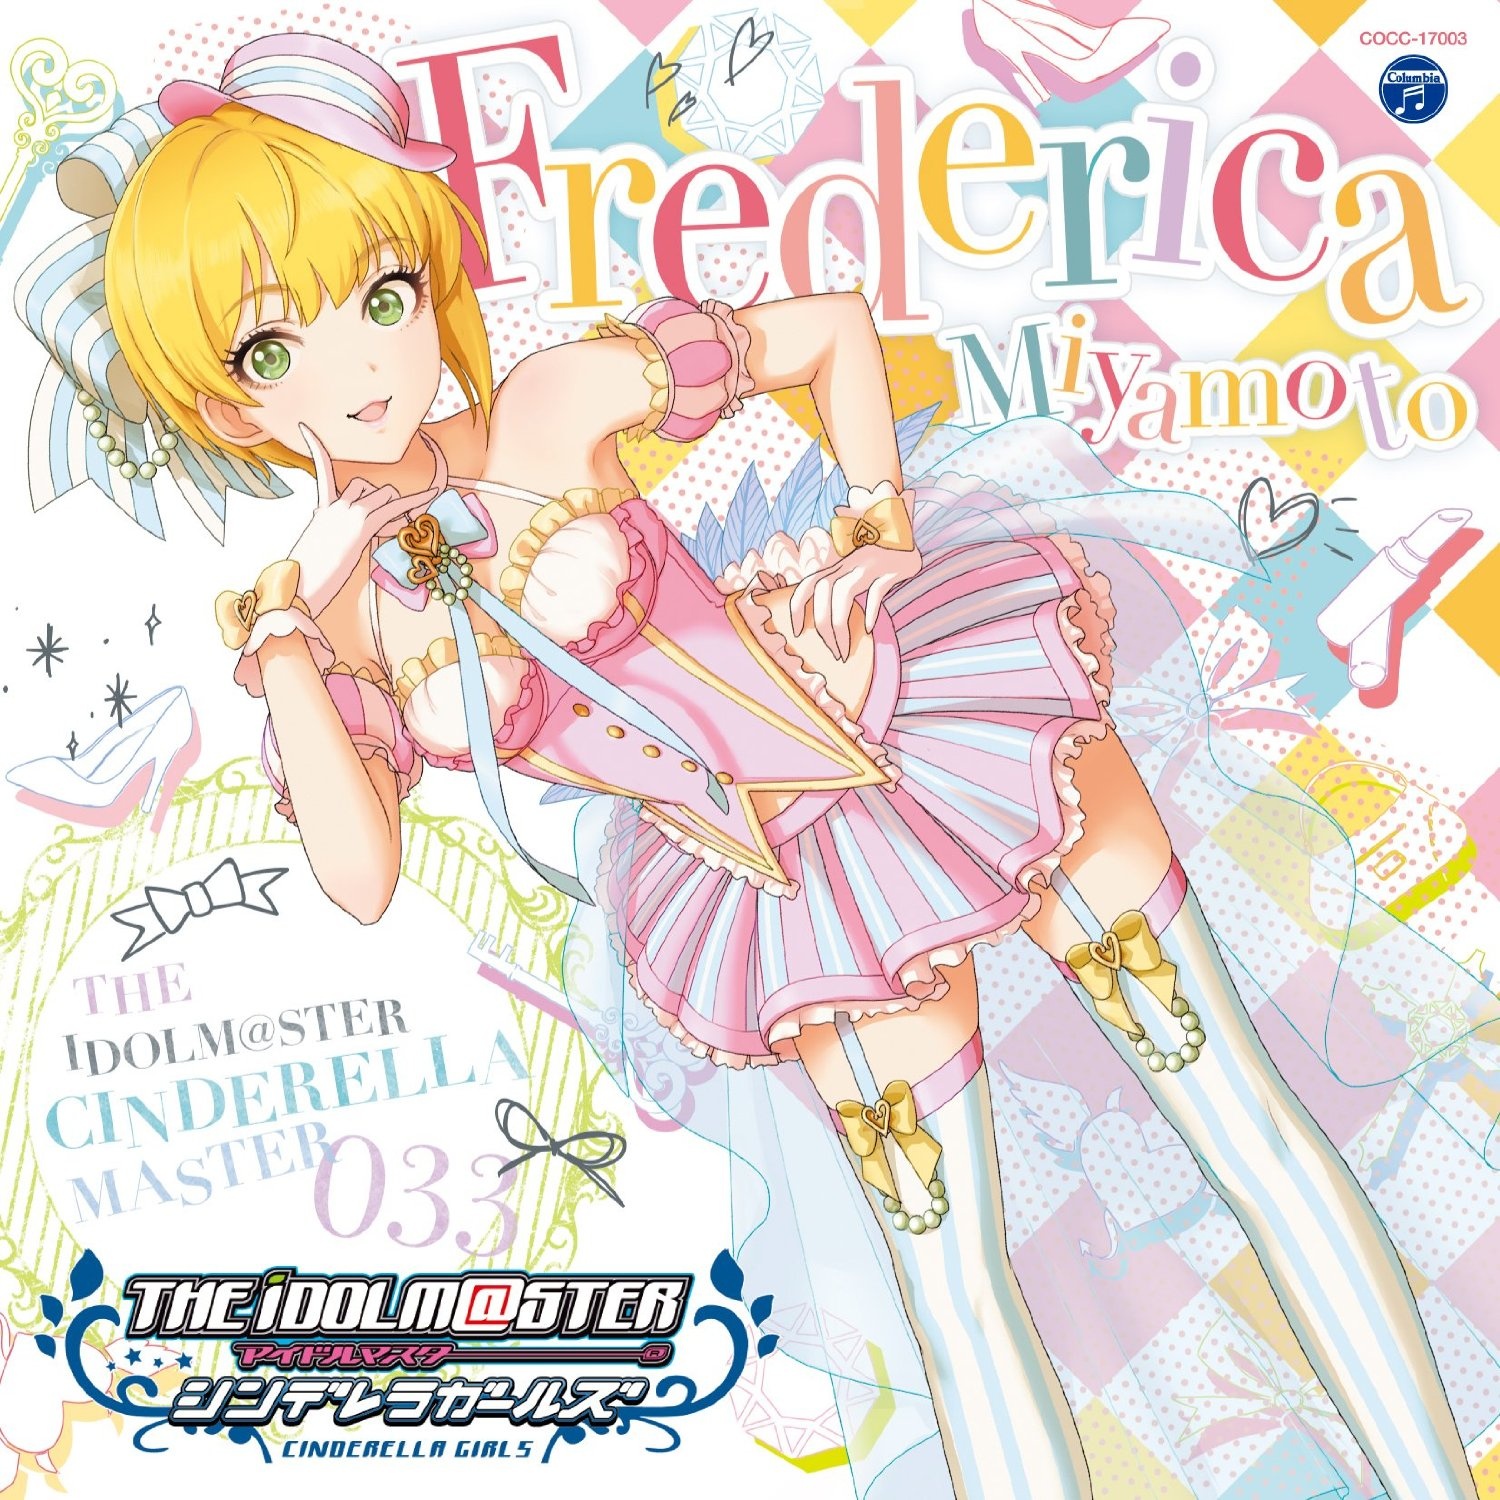 THE IDOLM STER CINDERELLA MASTER 033 gong ben